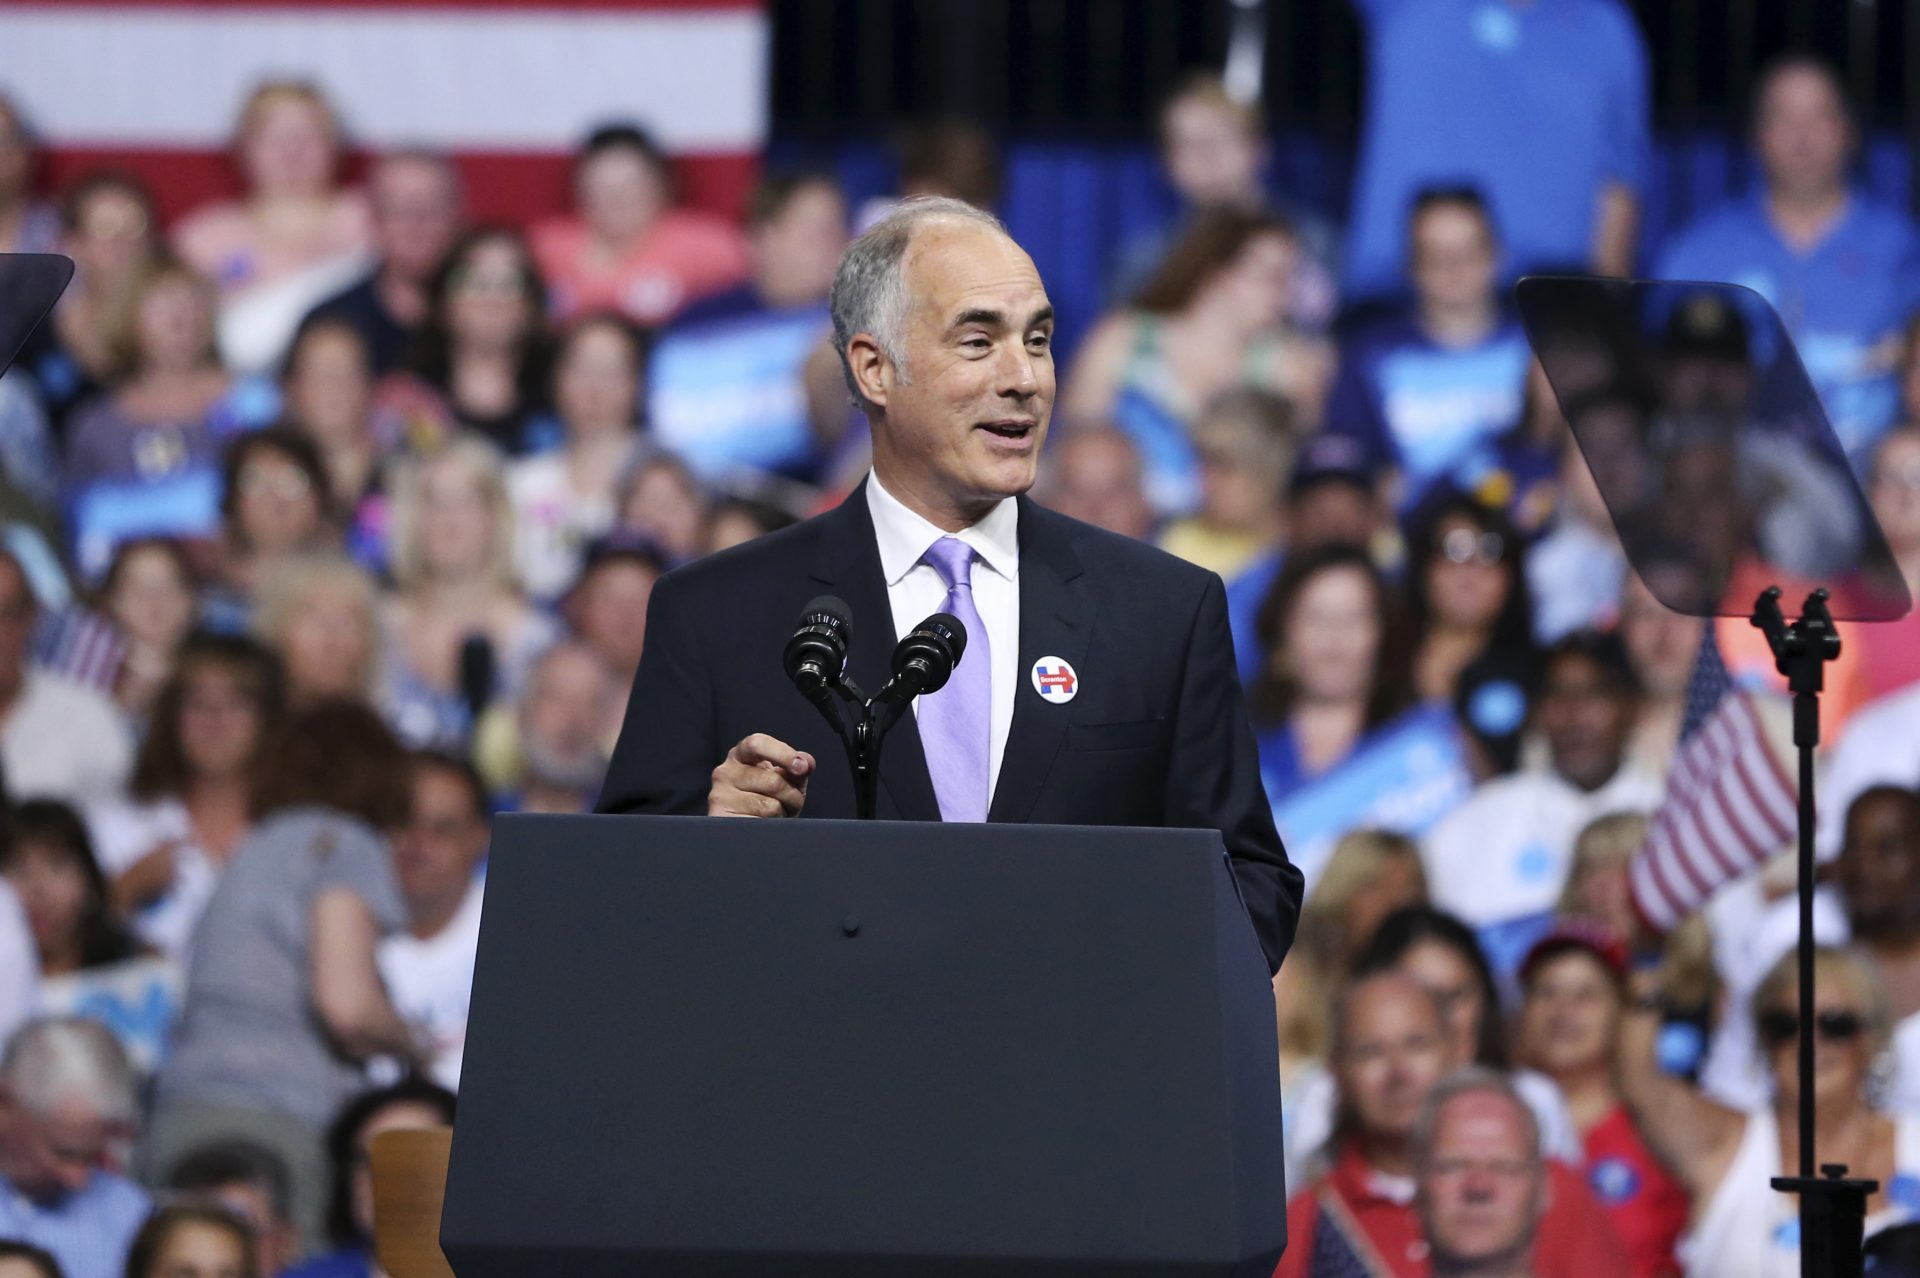 In this file photo, Sen. Bob Casey, Jr., D-Pa., speaks during a campaign rally with Vice President Joe Biden and Democratic presidential nominee Hillary Clinton Monday, Aug. 15, 2016, in Scranton, Pa.